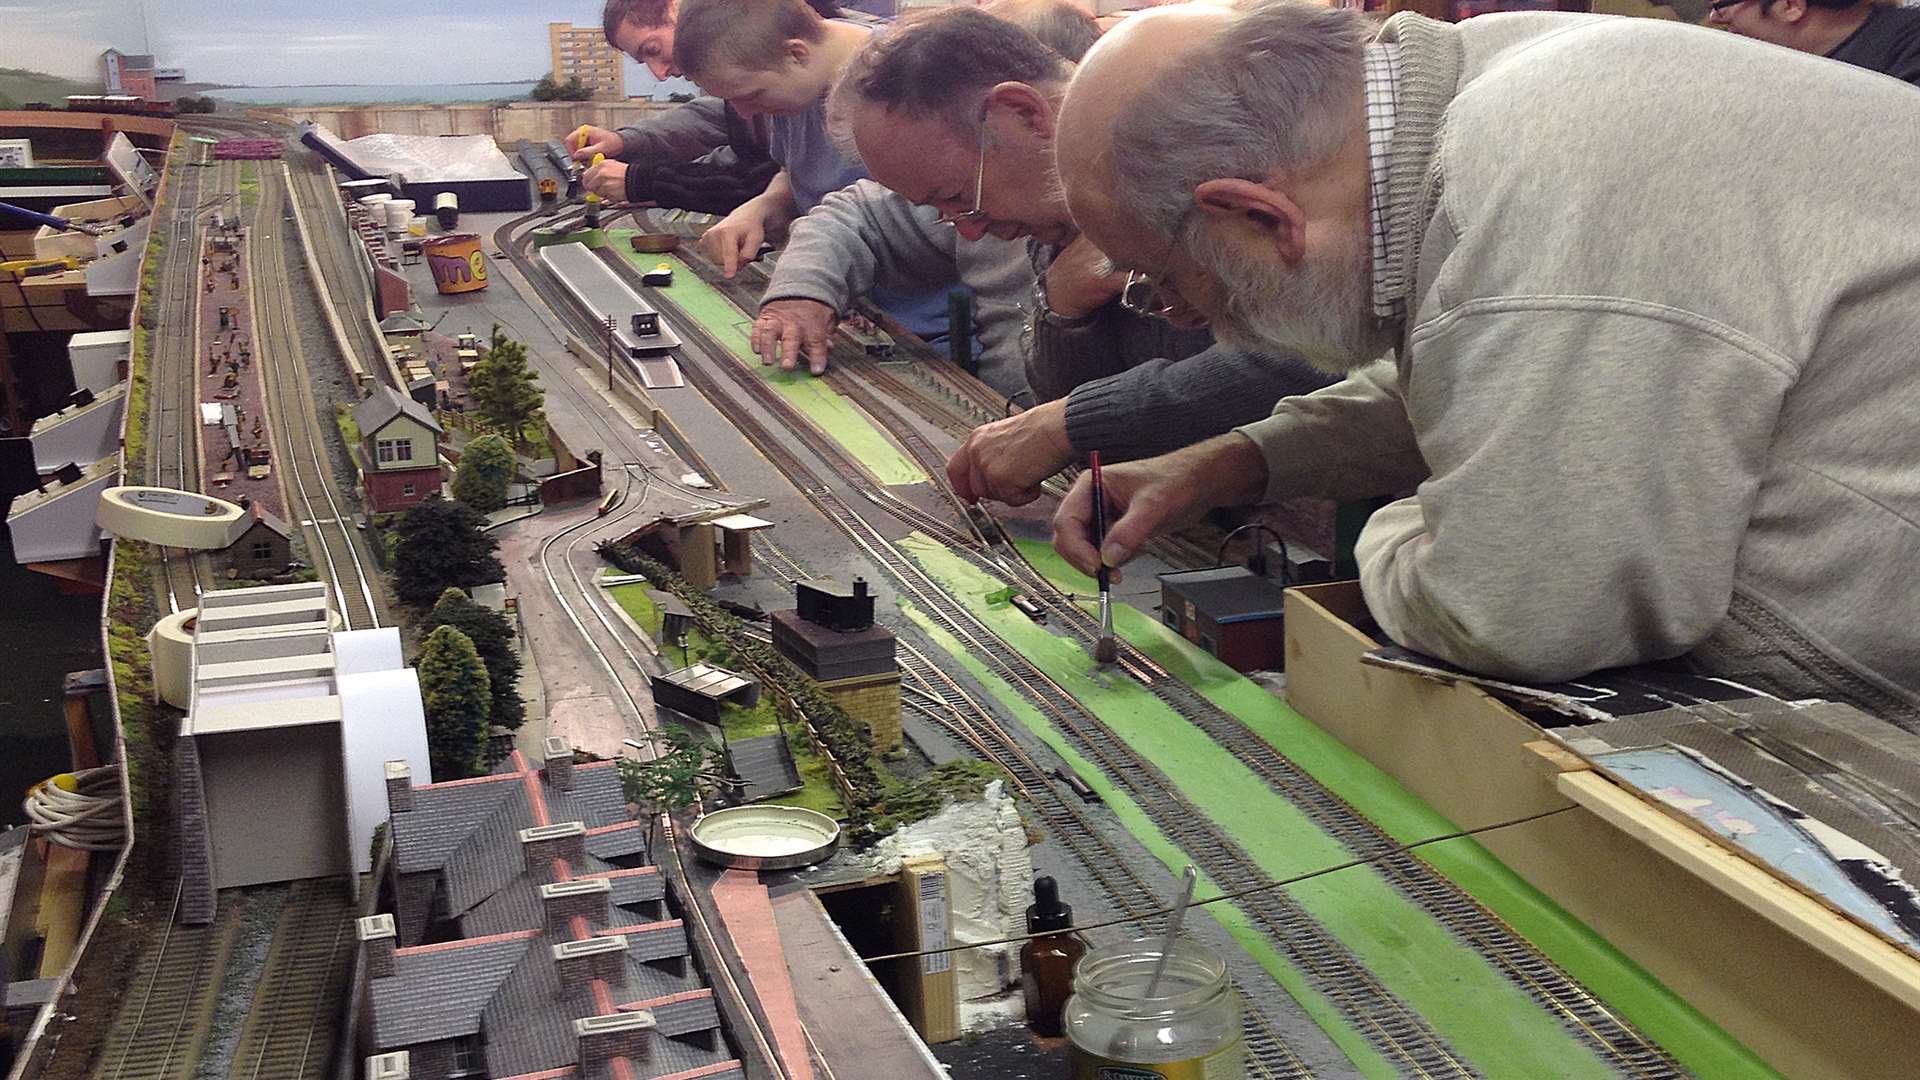 This Saturday's show is organised by the East Kent Model Railway Society